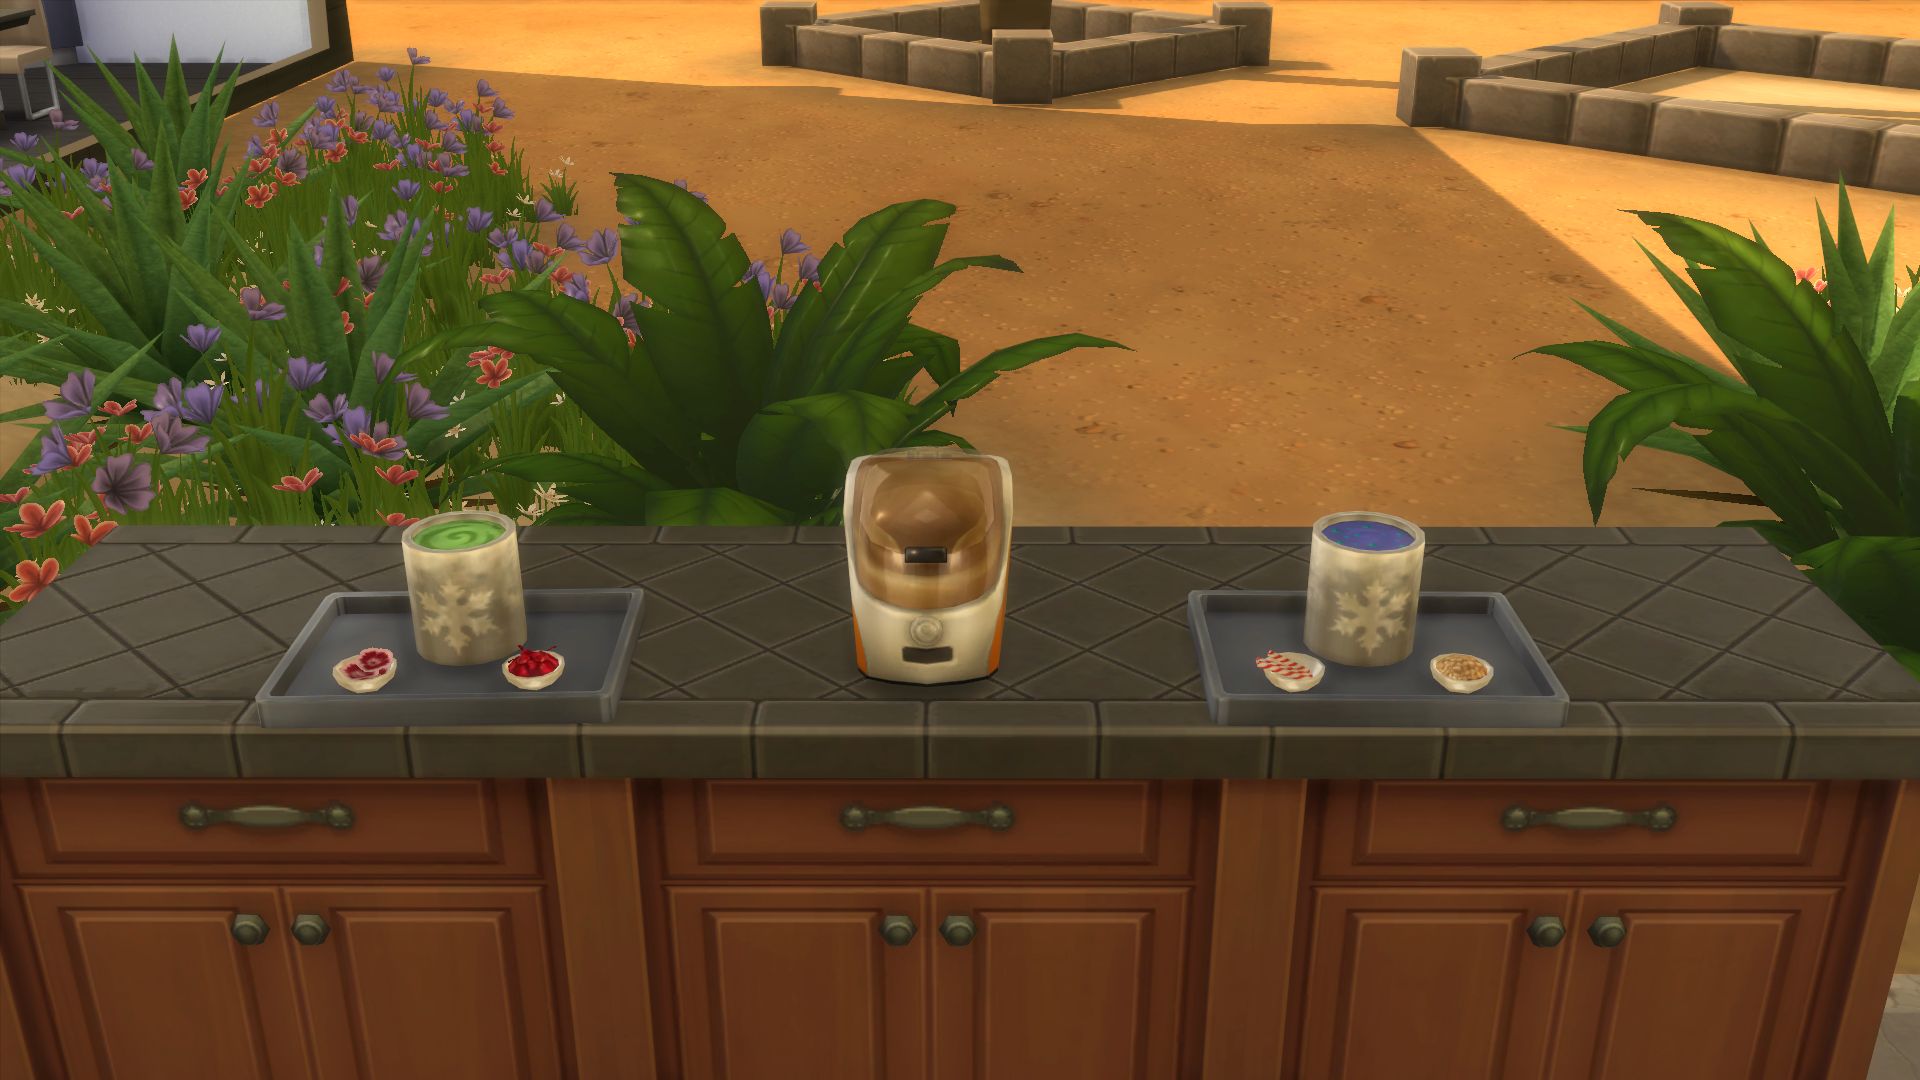 Sims 4 Cool Kitchen Stuff Pack - Complete Review 